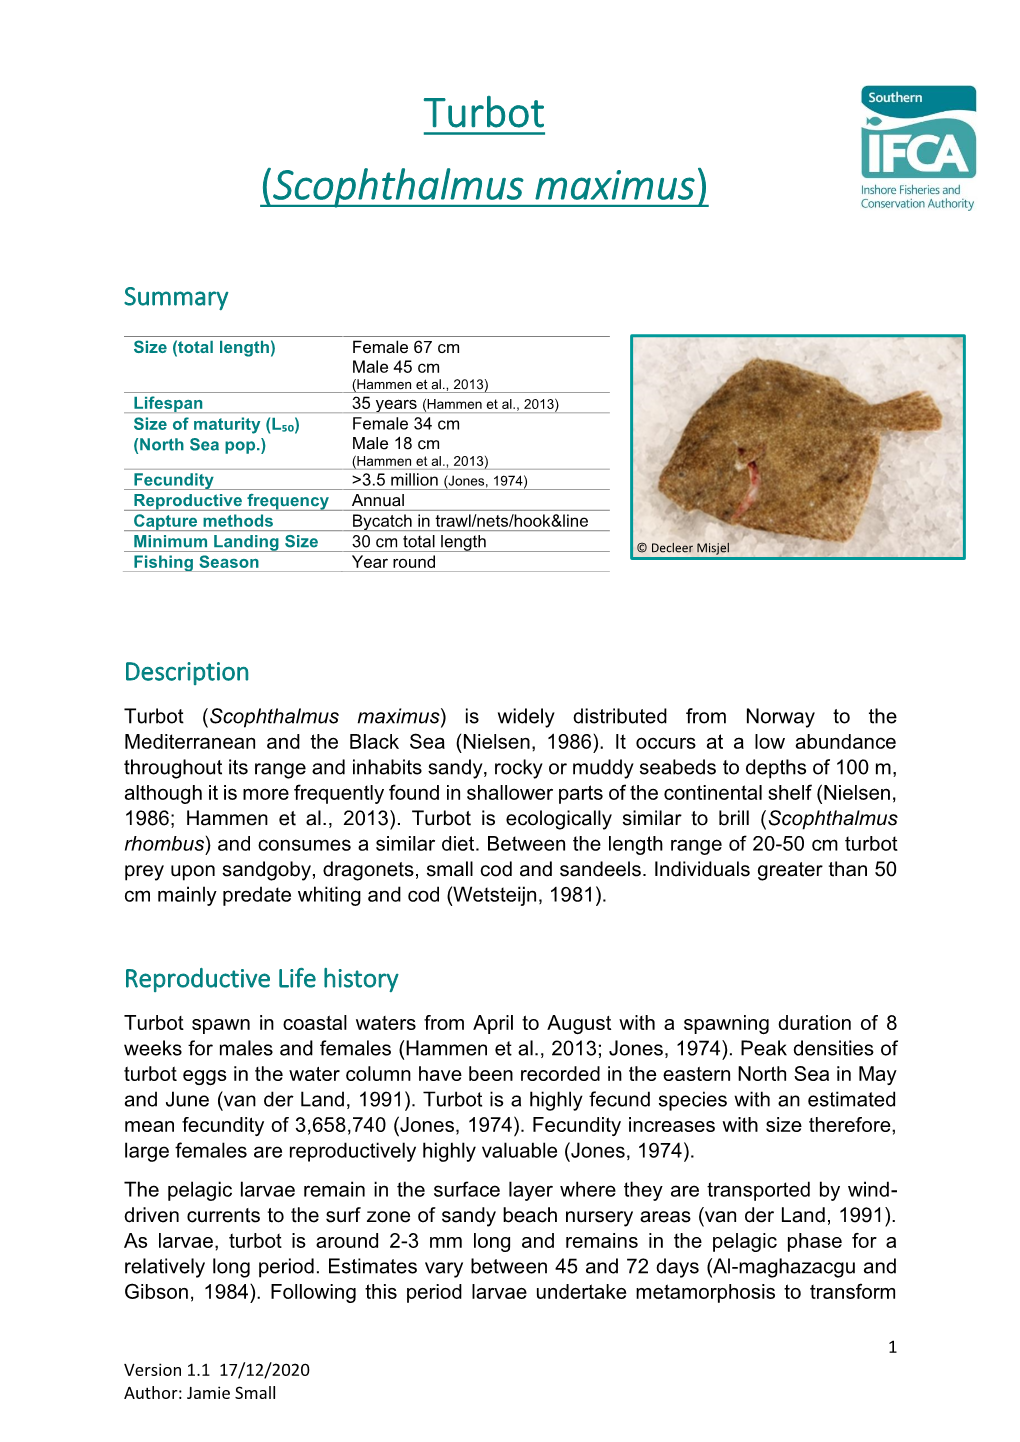 Turbot (Scophthalmus Maximus) Is Widely Distributed from Norway to the Mediterranean and the Black Sea (Nielsen, 1986)